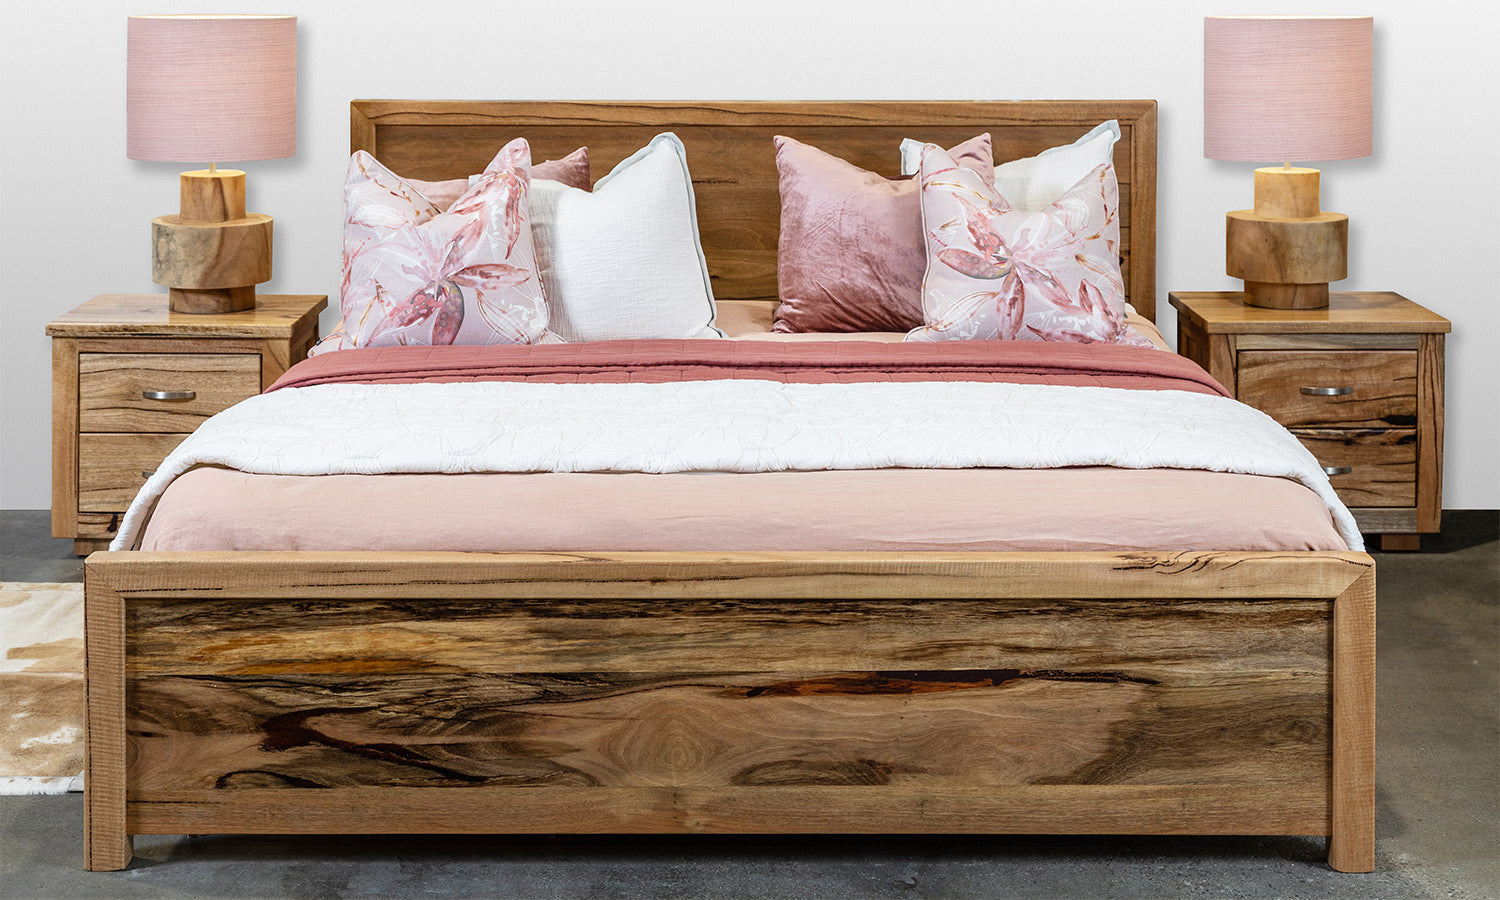 Leeuwin Solid Marri Timber Wood WA Made Queen or King Bed and Bedroom Suite with bedside tables, Perth WA